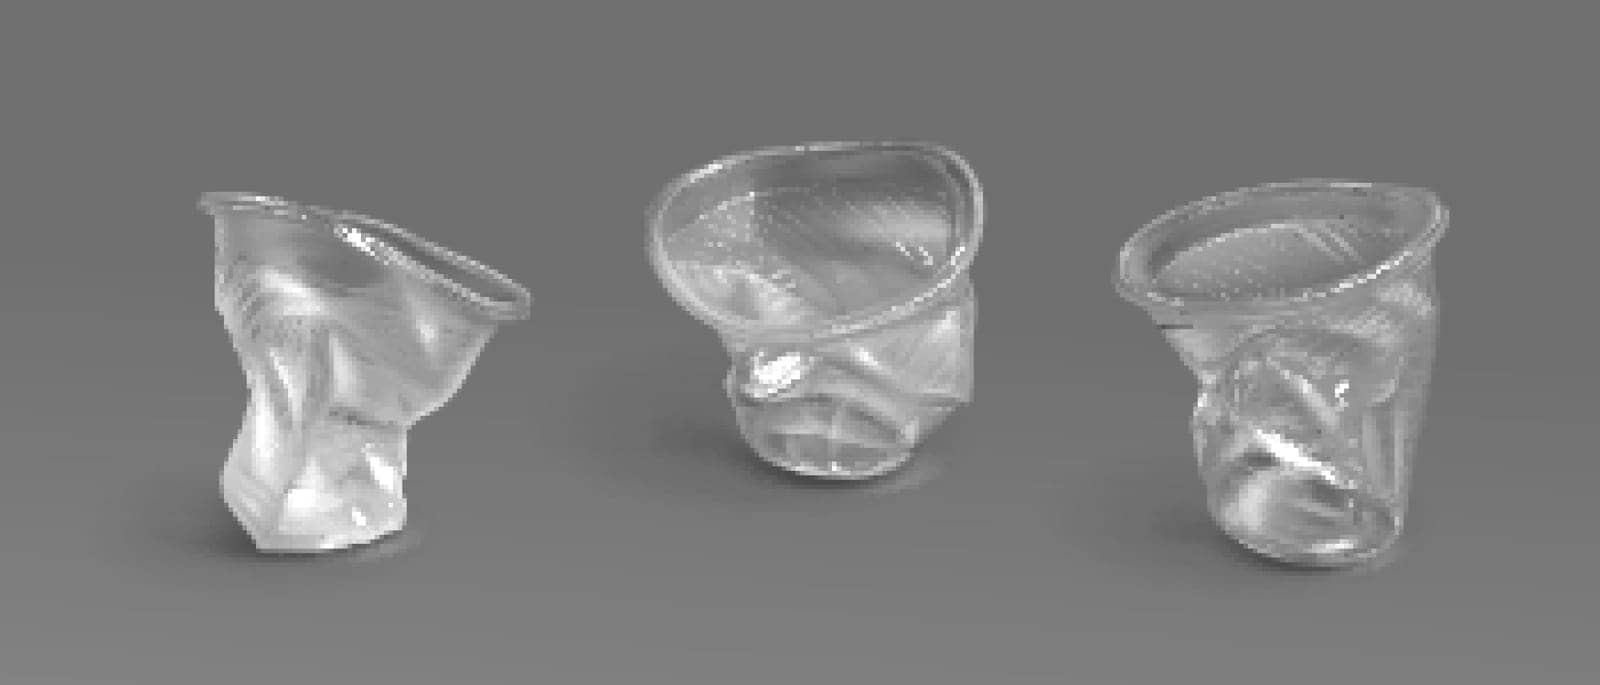 Used plastic cups, transparent disposable glasses by upklyak